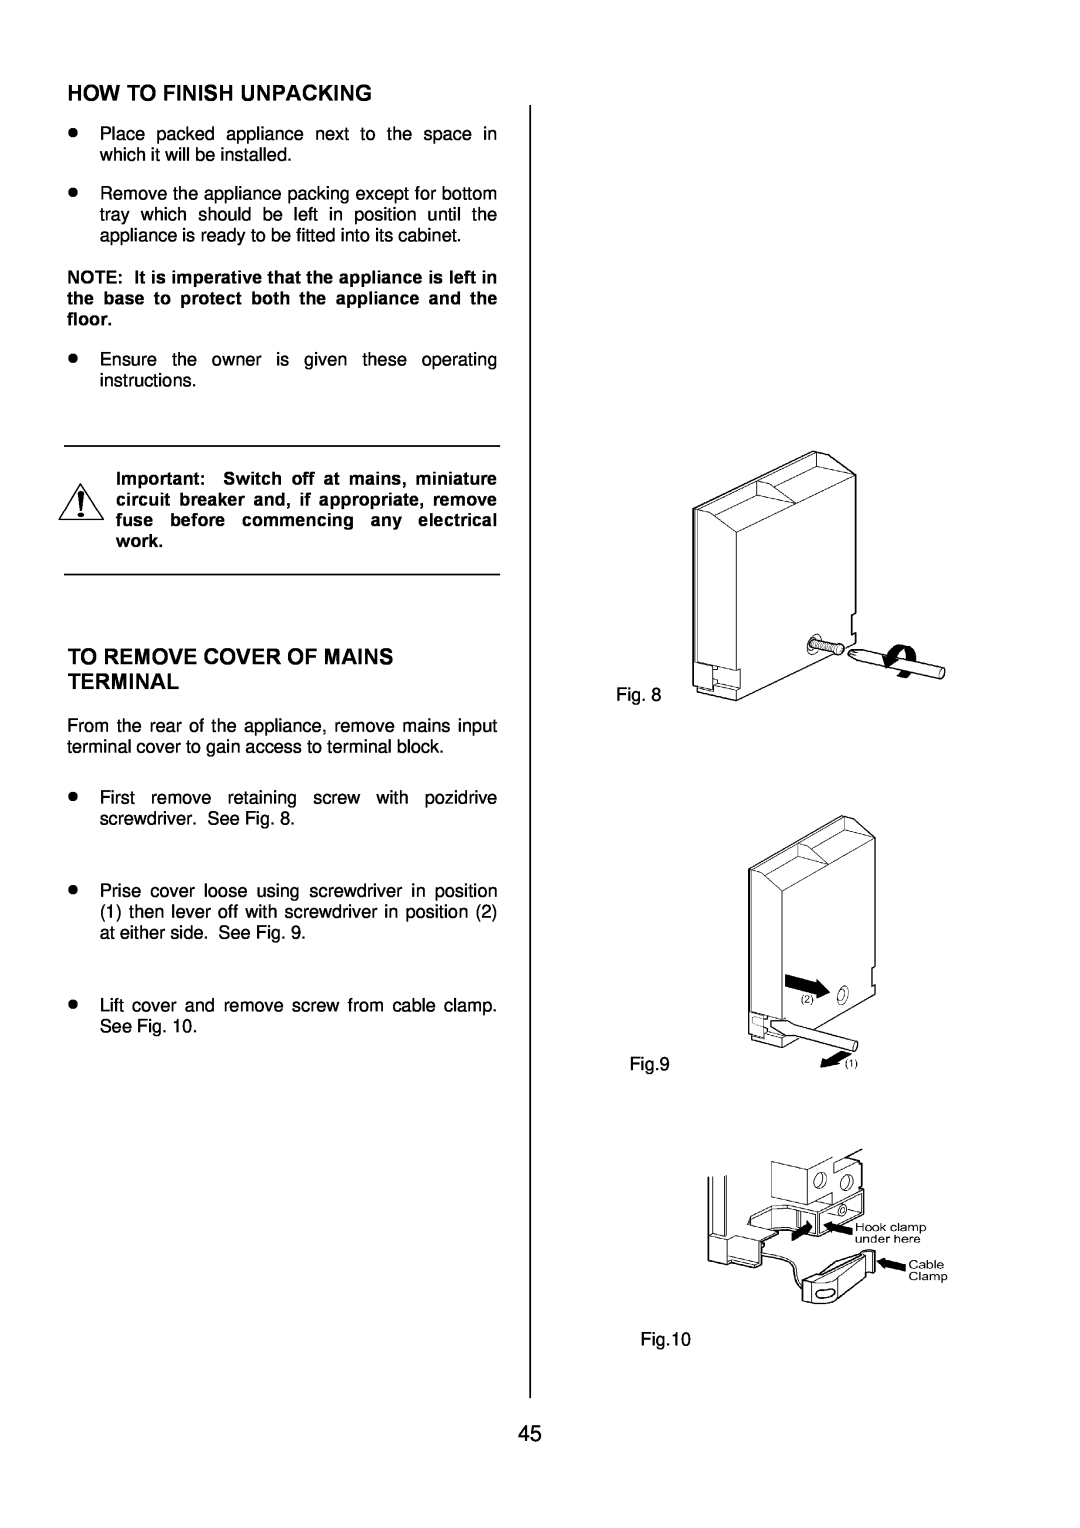 Zanussi ZUQ 875 manual How To Finish Unpacking, To Remove Cover Of Mains Terminal 